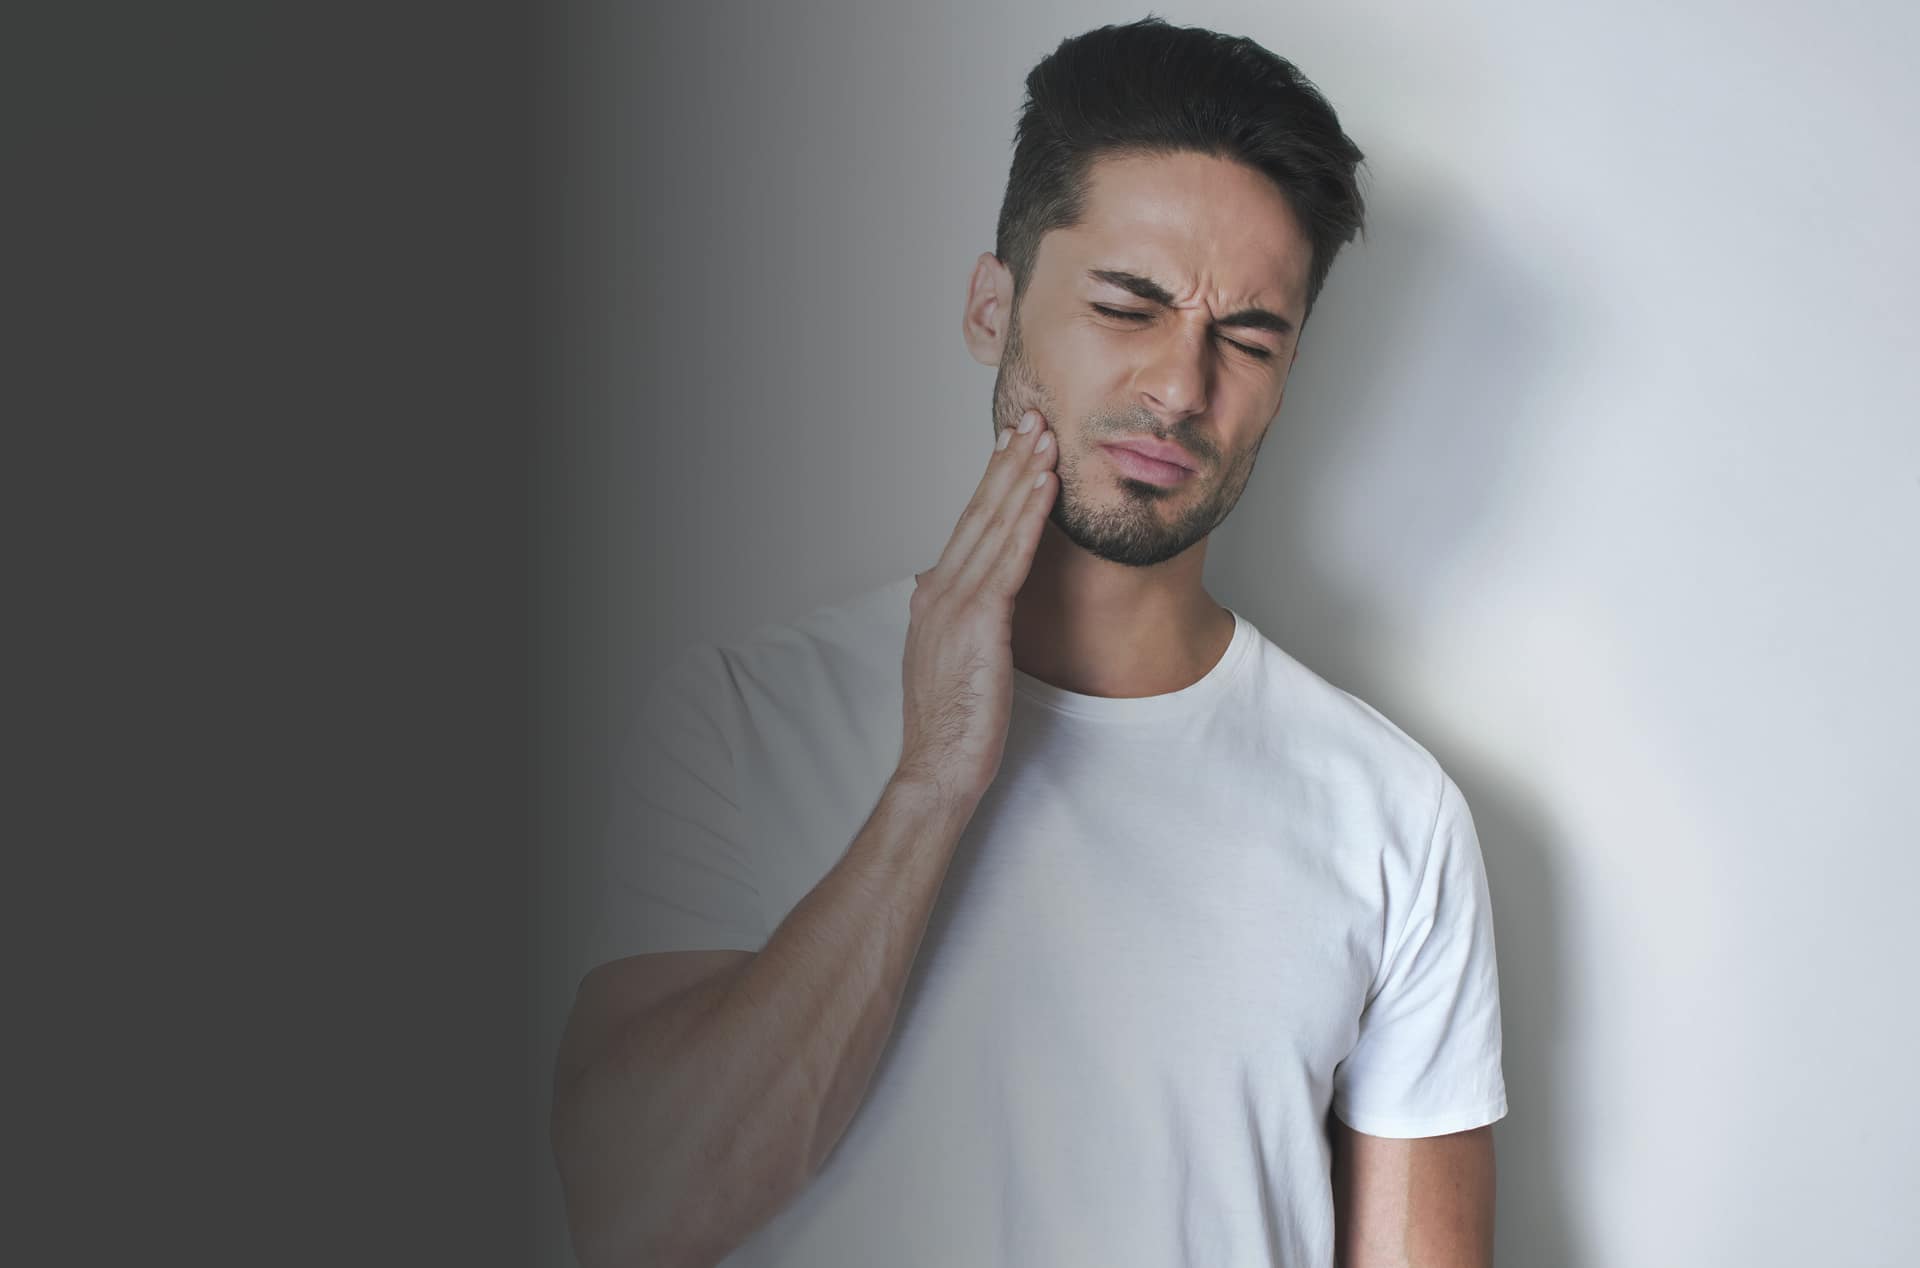 Man suffering with TMJ problems